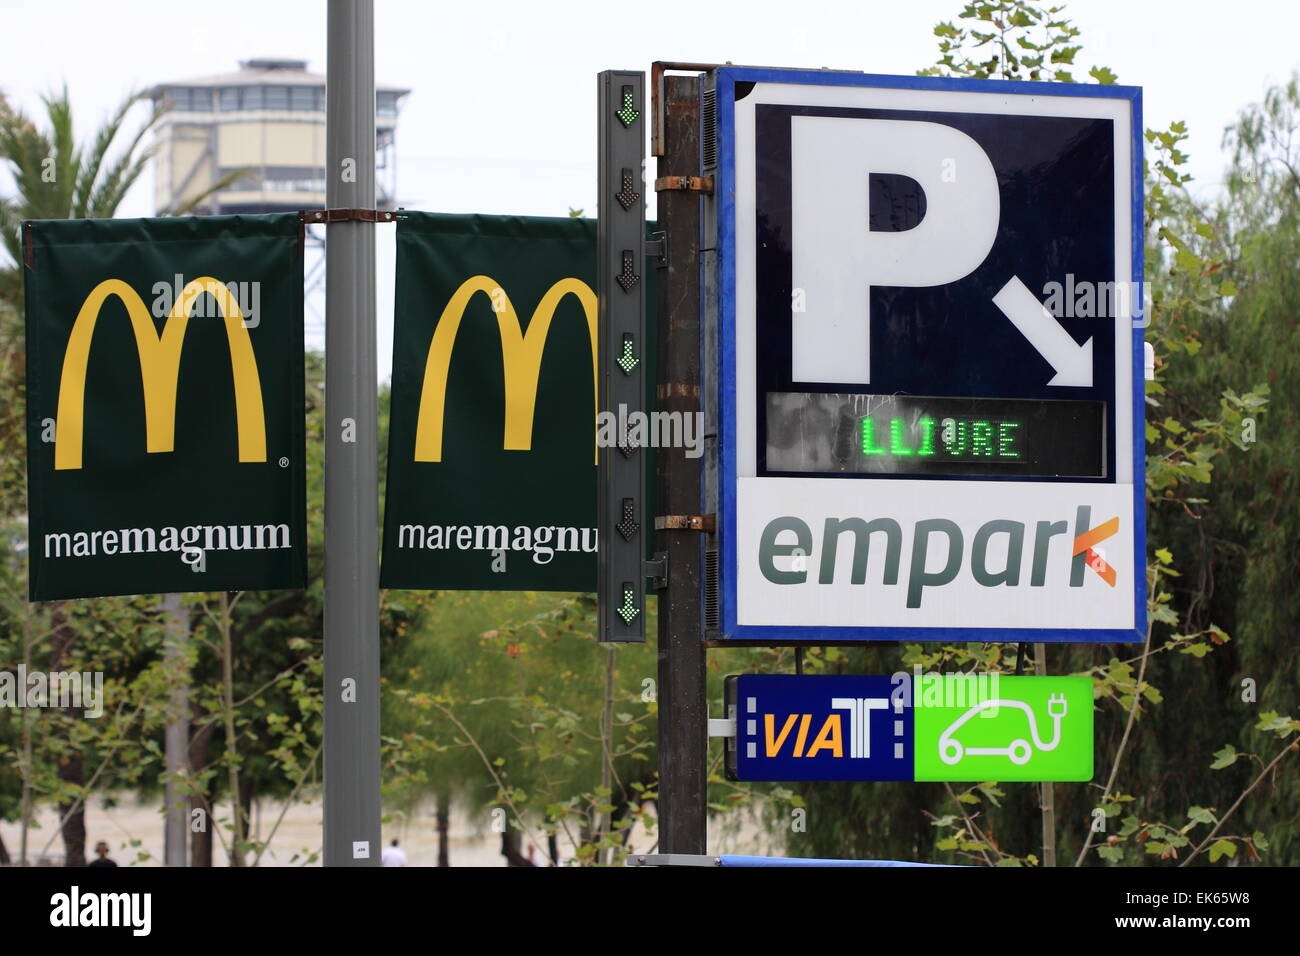 Empark parking sign and Maremagnum signs in Barcelona, Catalunya, Spain,  August 2014 Stock Photo - Alamy